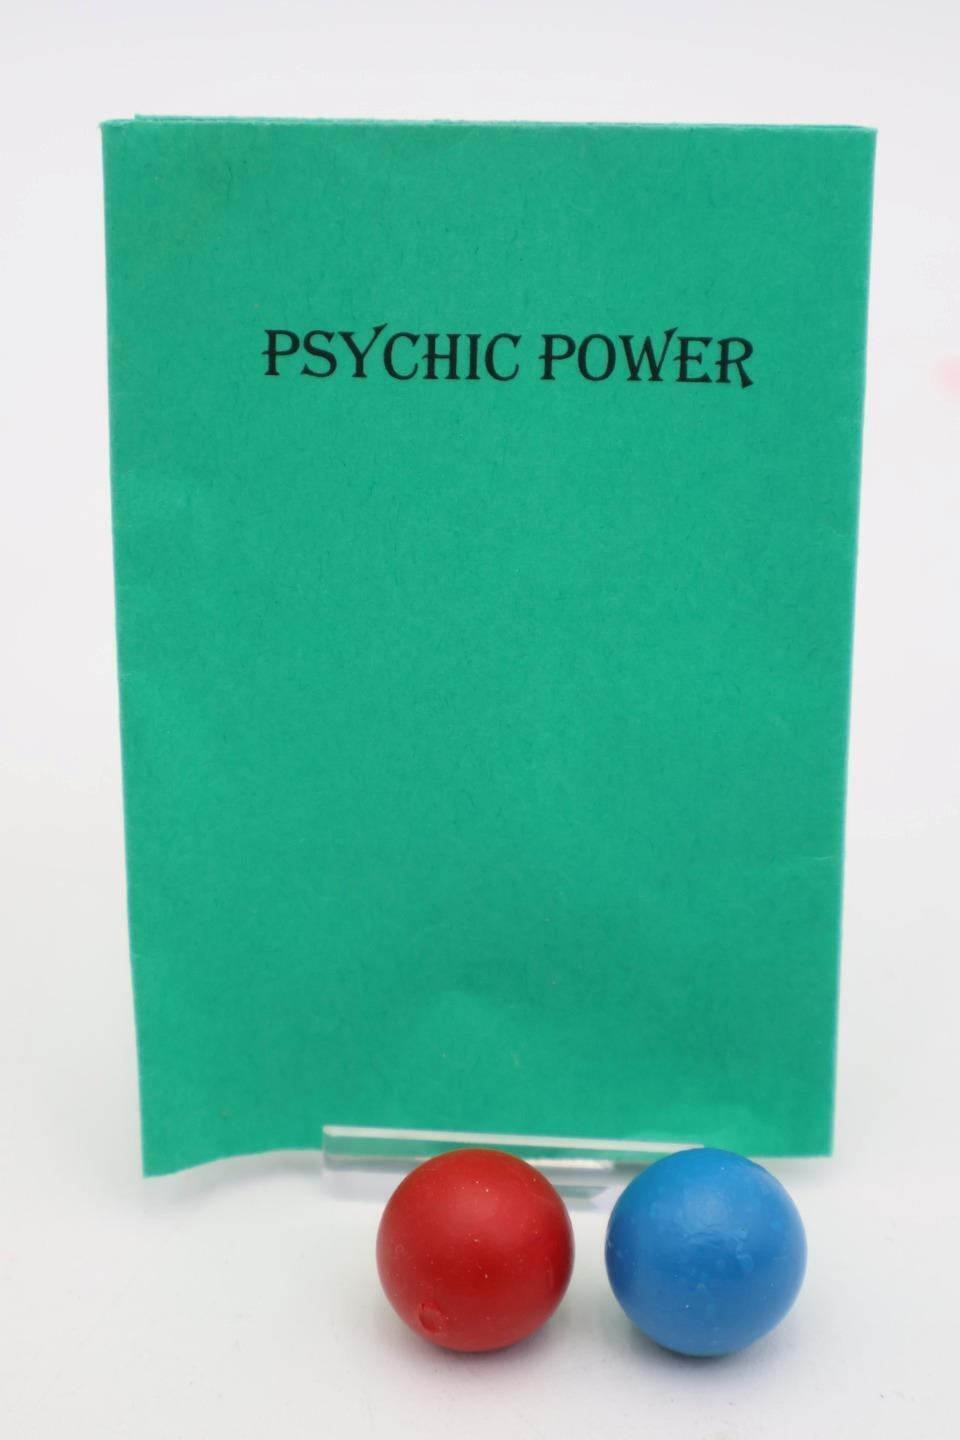 Vintage Collectible Psychic Power by Unknown Mentalism Magic Trick